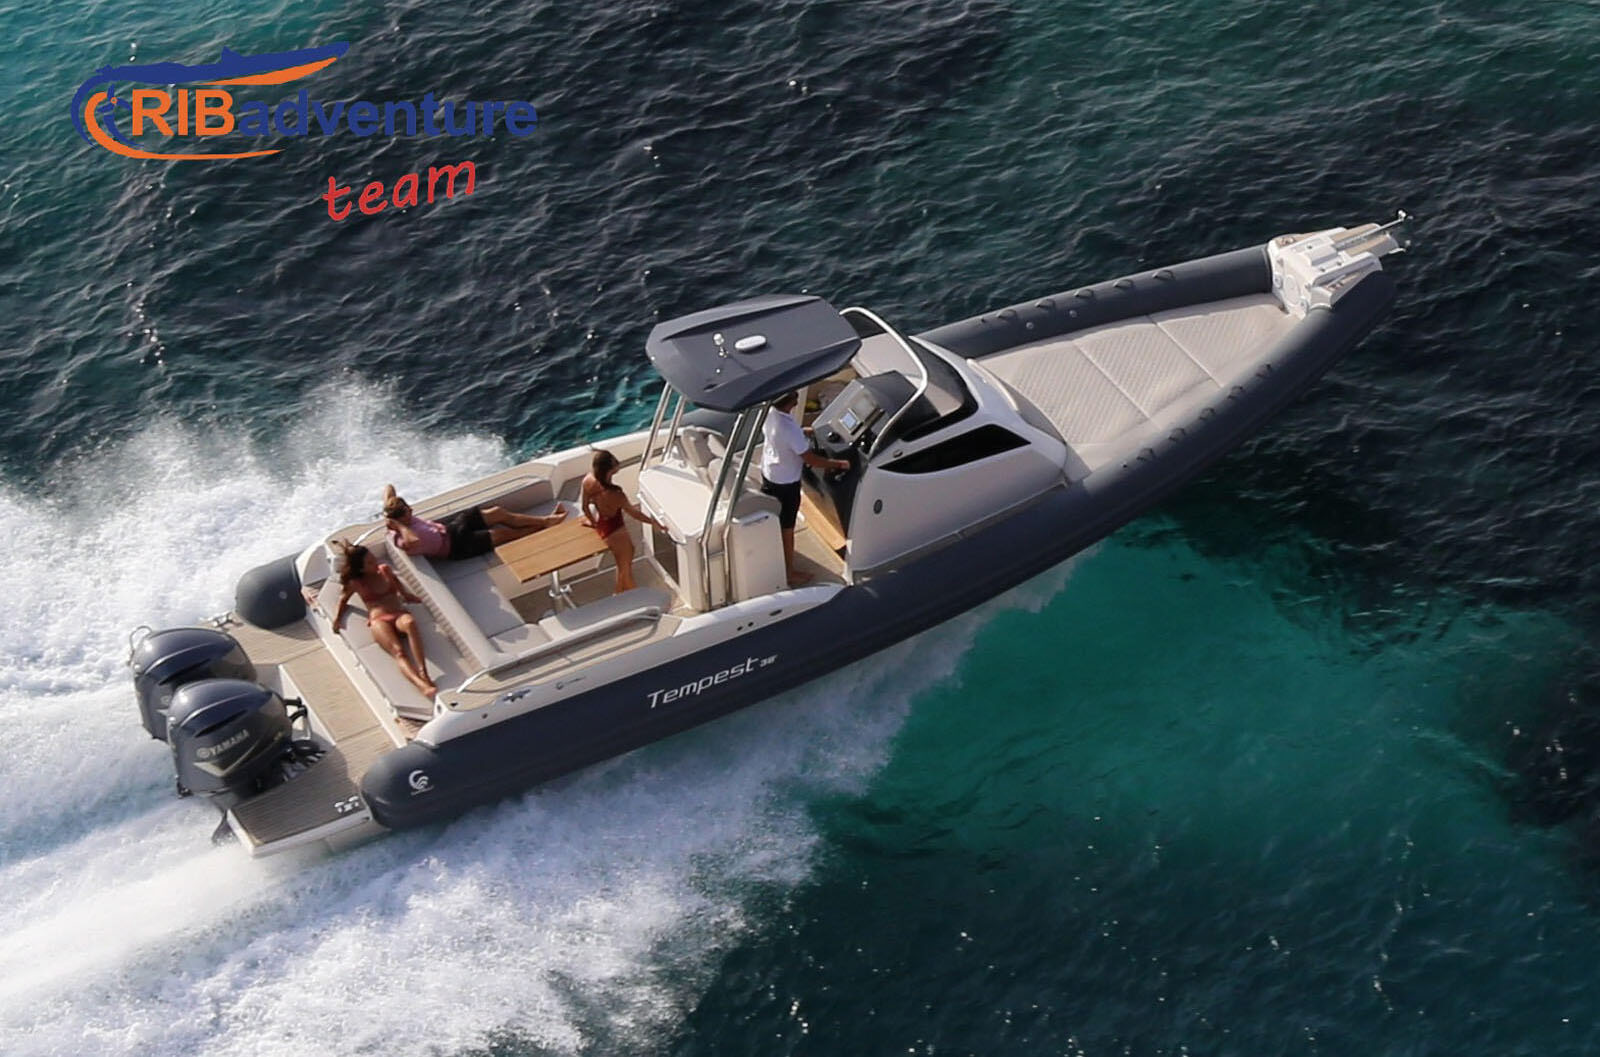 Capelli Tempest 38΄ with twin 350hp Yamaha outboard engines